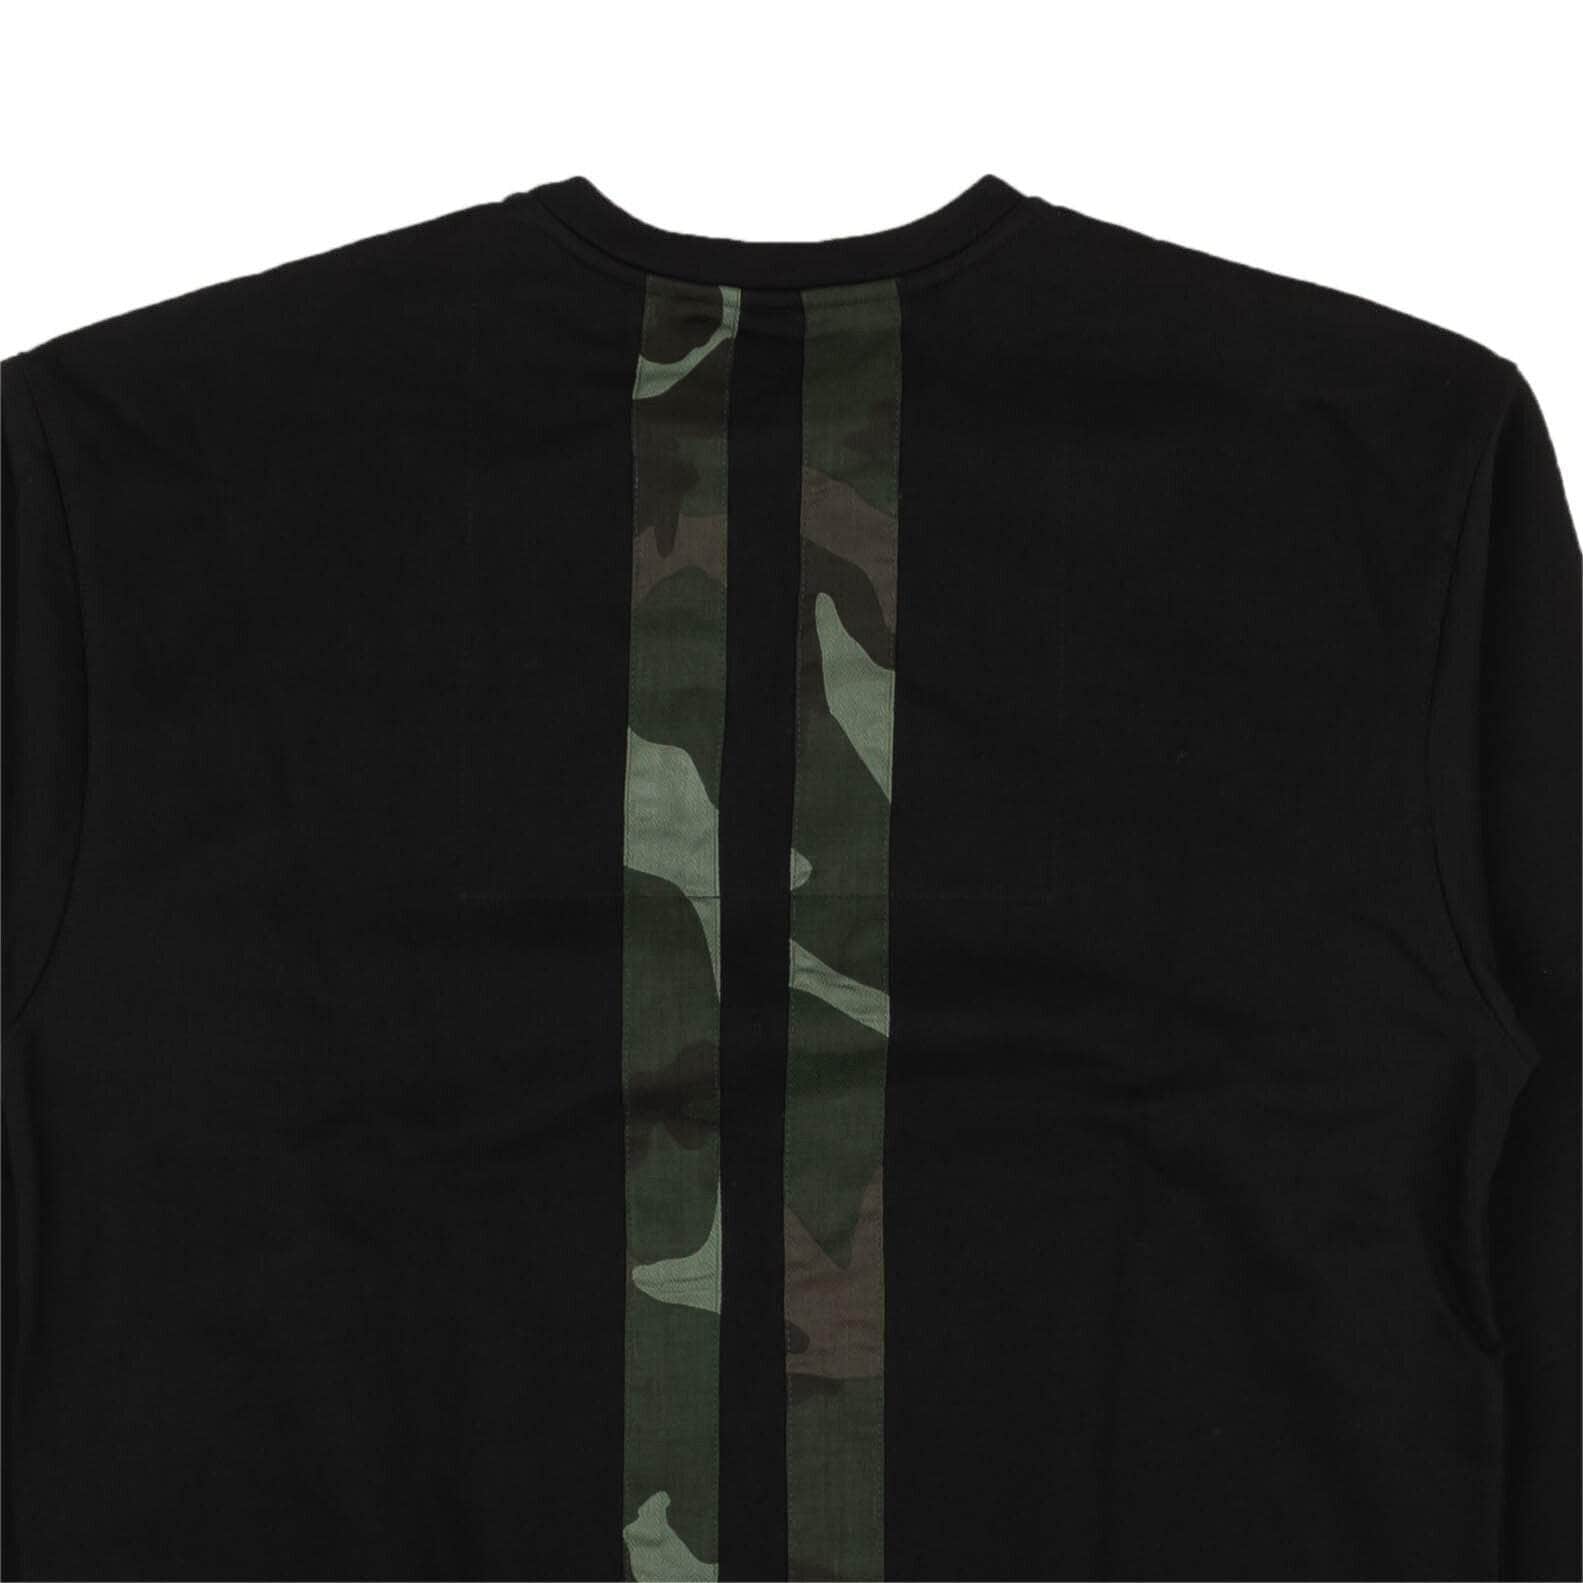 PYER MOSS channelenable-all, chicmi, couponcollection, gender-mens, main-clothing, shop375 Black And Green Camo Stripes Crewneck Sweatshirt